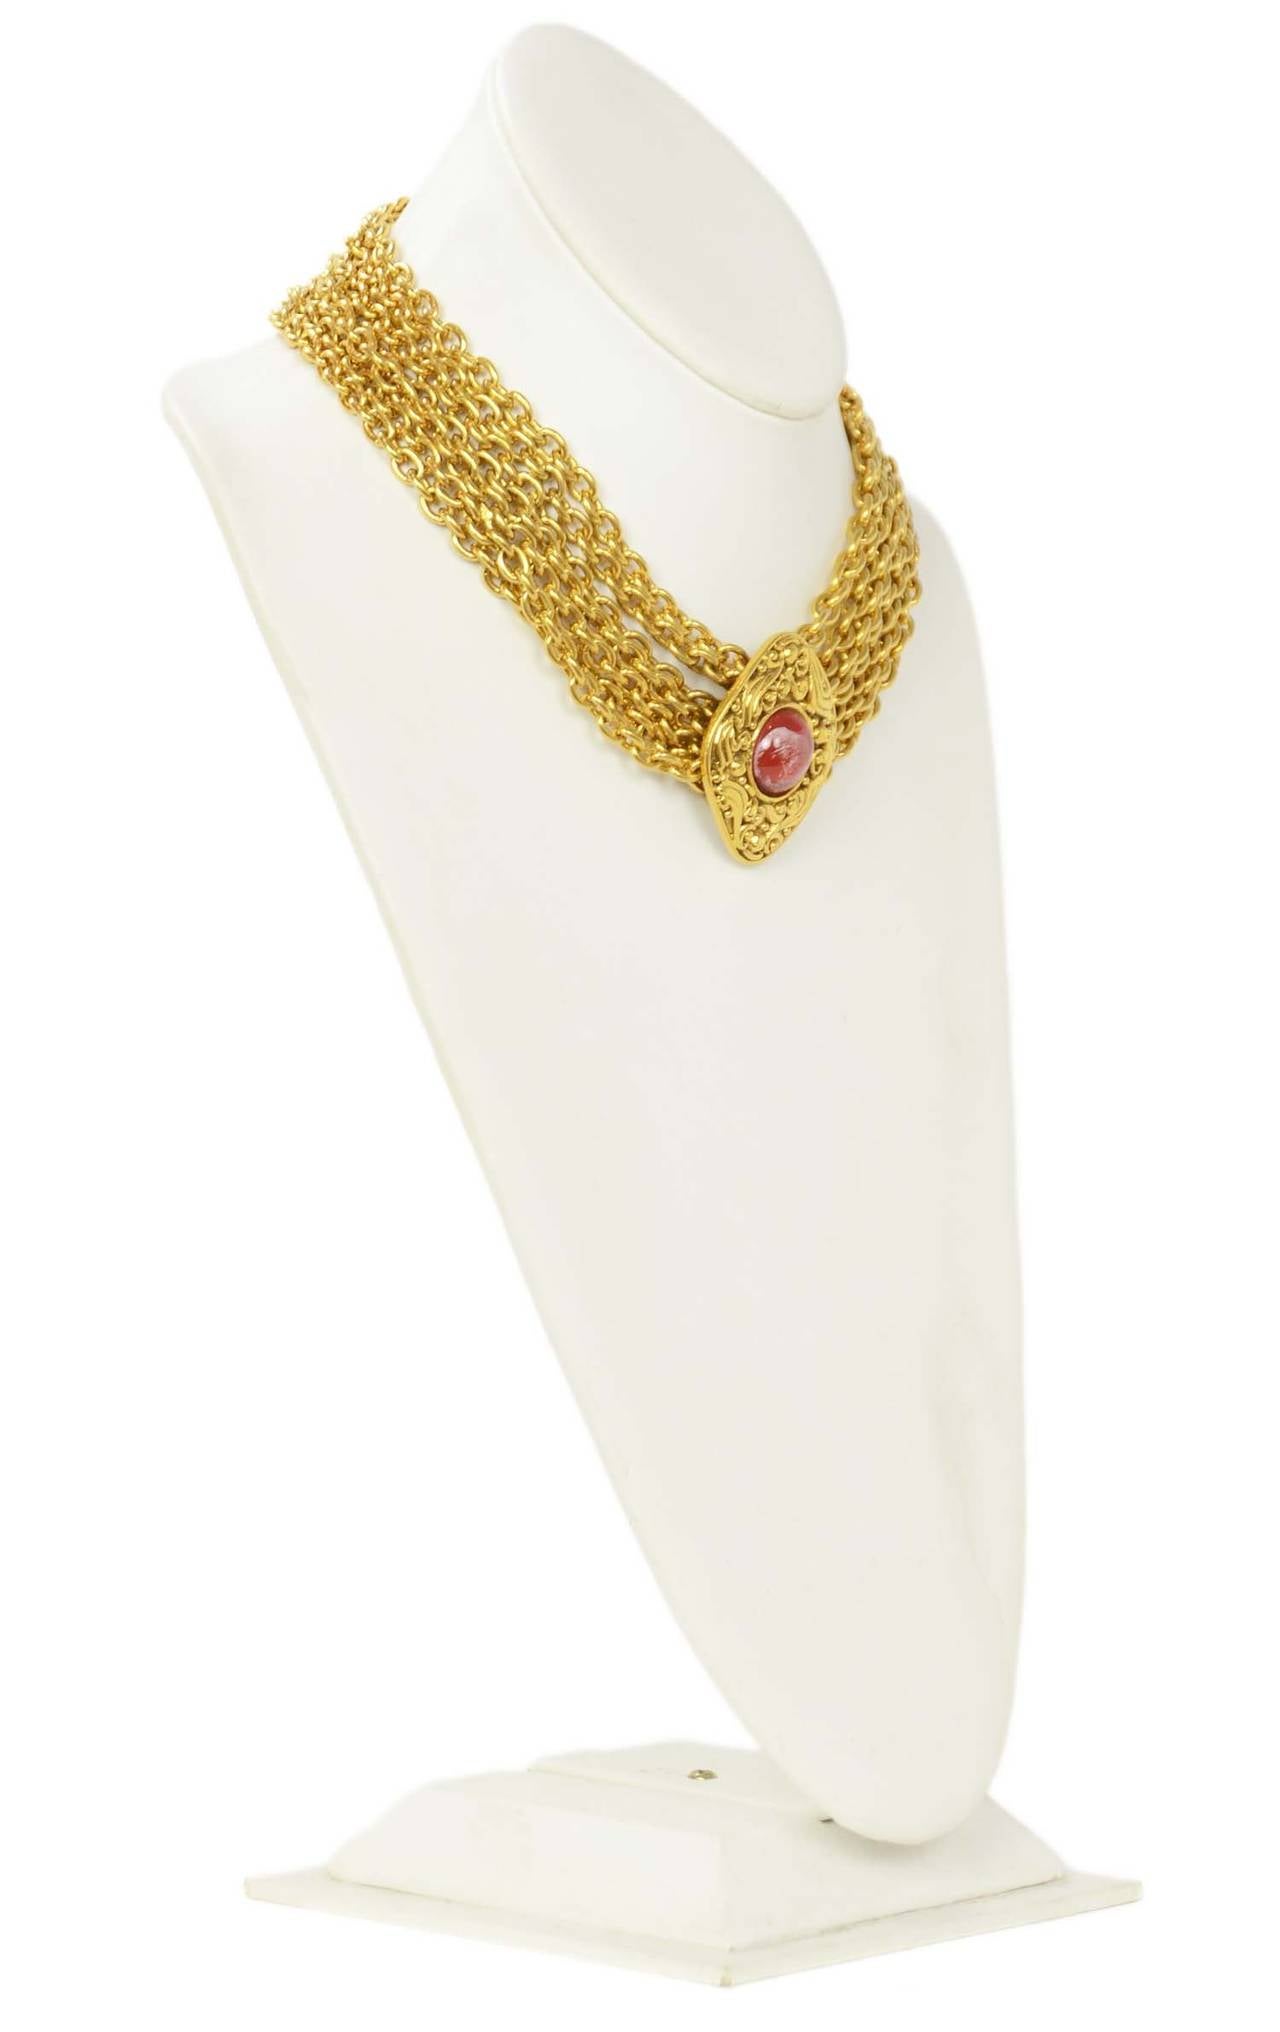 Chanel Vintage Gold and Red Gripoix Choker Necklace
Features red gripoix and gold pendant detail at back closure
    Made in: France
    Stamp: CHANEL CC MADE IN FRANCE
    Closure: Hook and eye closure
    Color: Goldtone and red
   